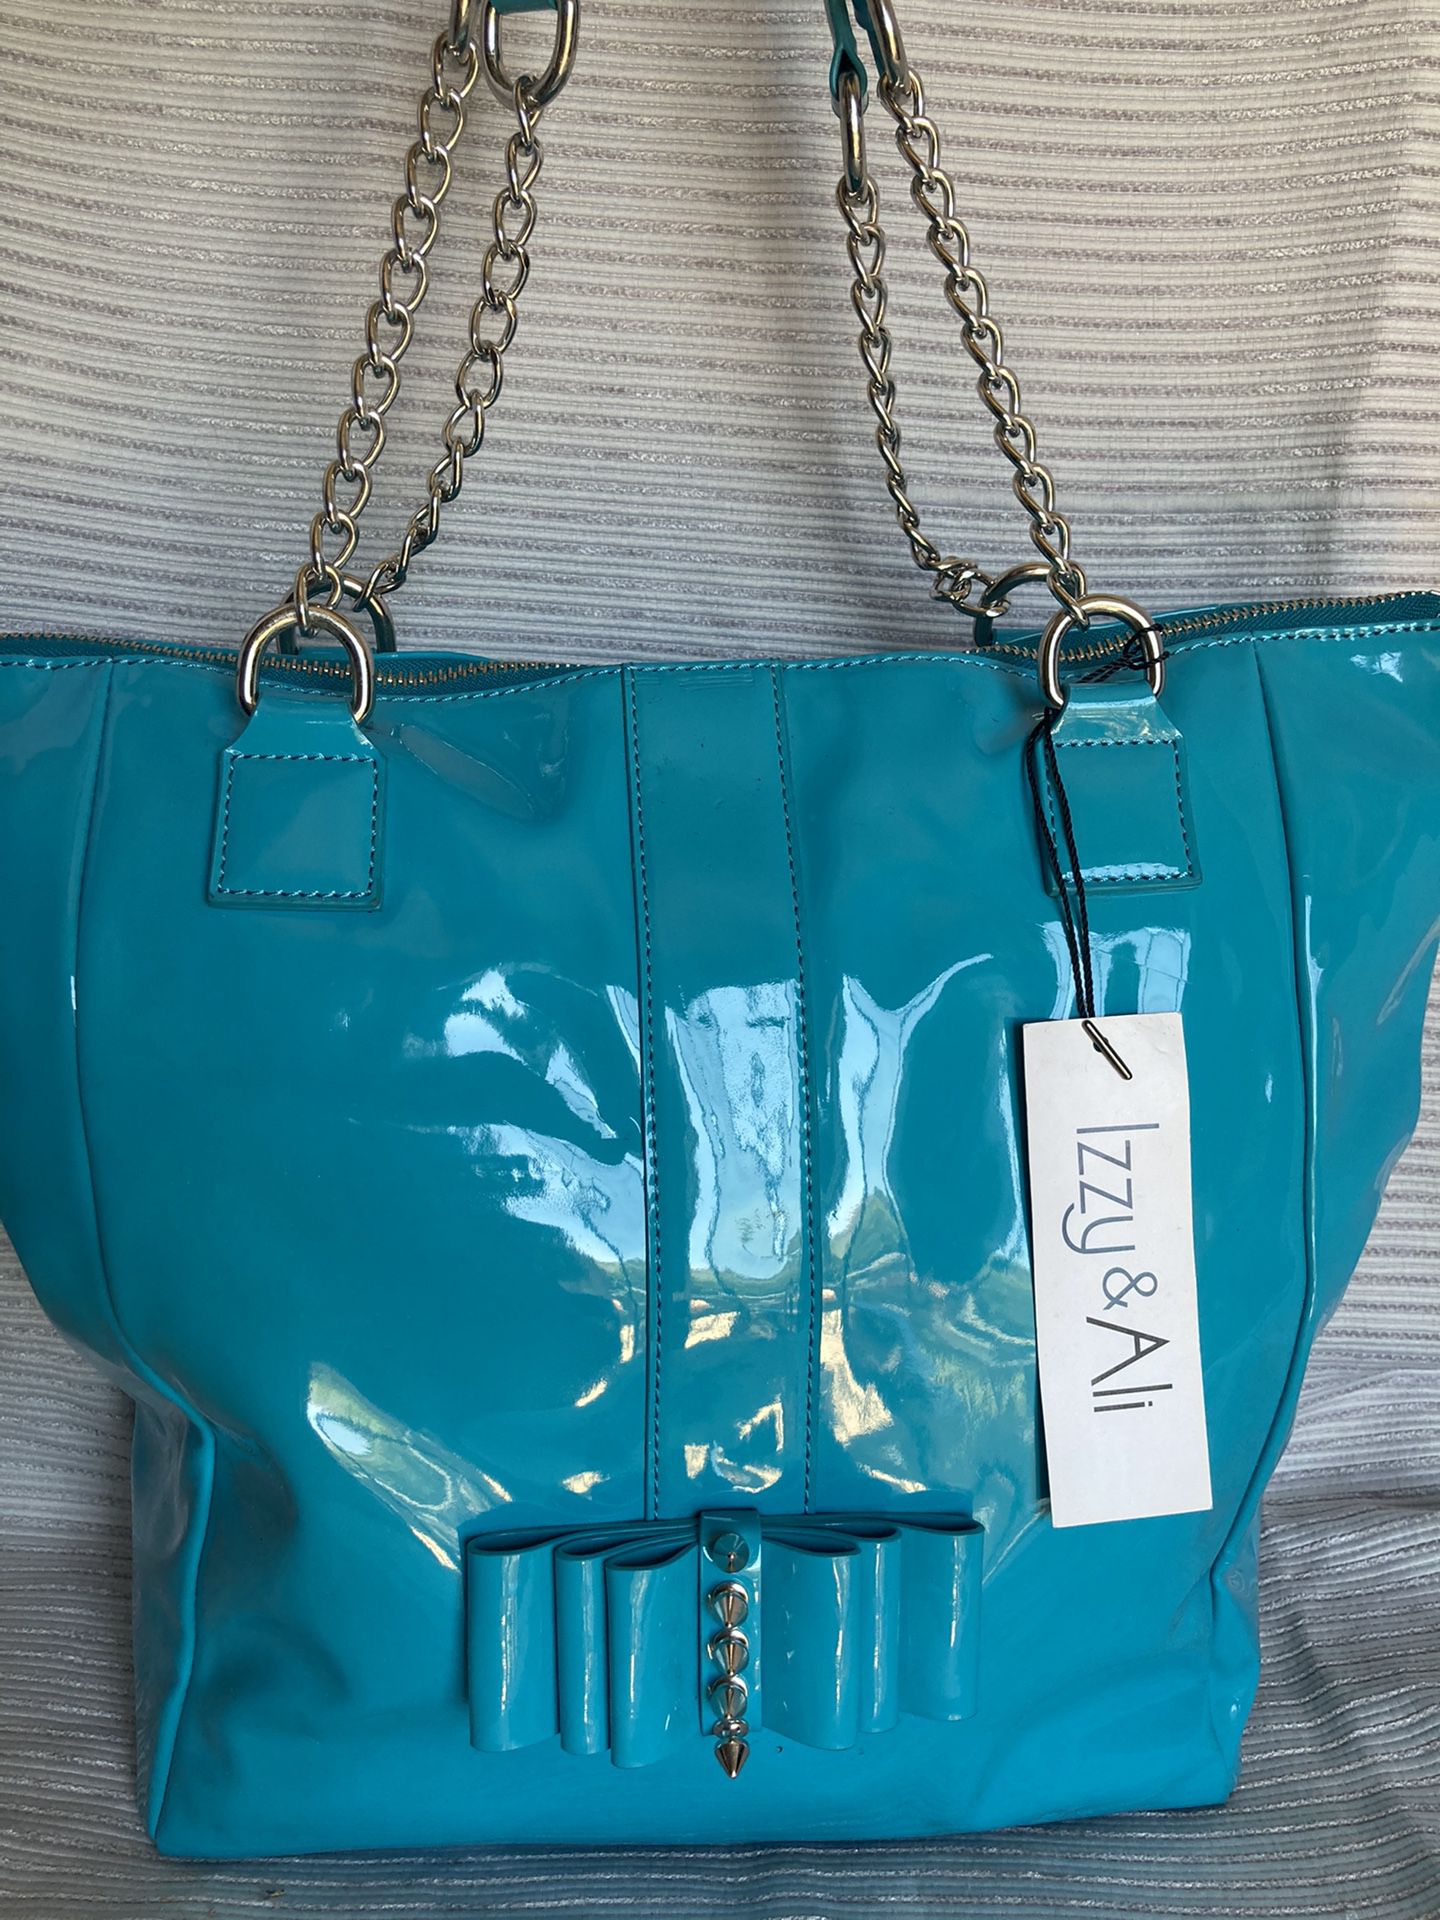 Izzy & Alli Turquoise Silver Tote Bag NWT